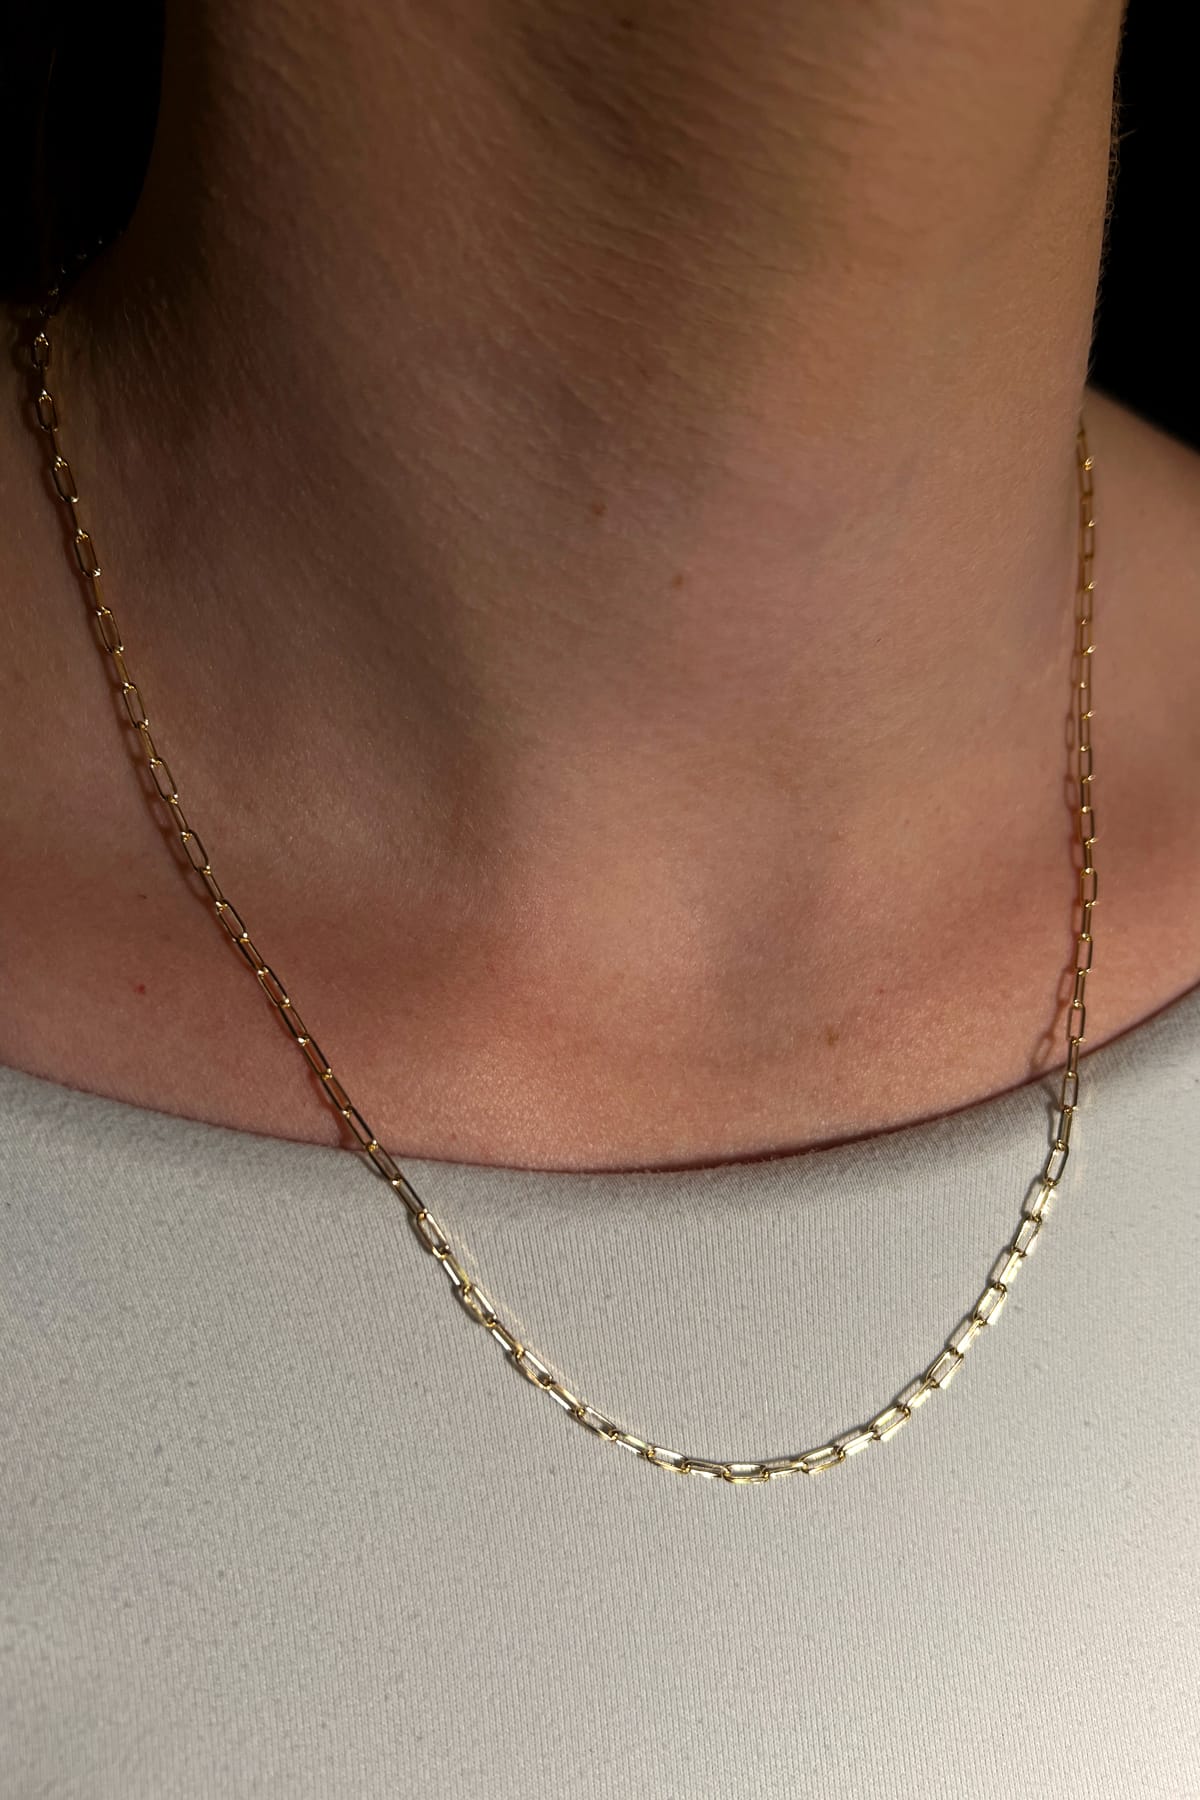 9 Carat Yellow Gold 50cm Long Open Oval Hammered 2.44mm Chain available at LeGassick Diamonds and Jewellery Gold Coast, Australia.